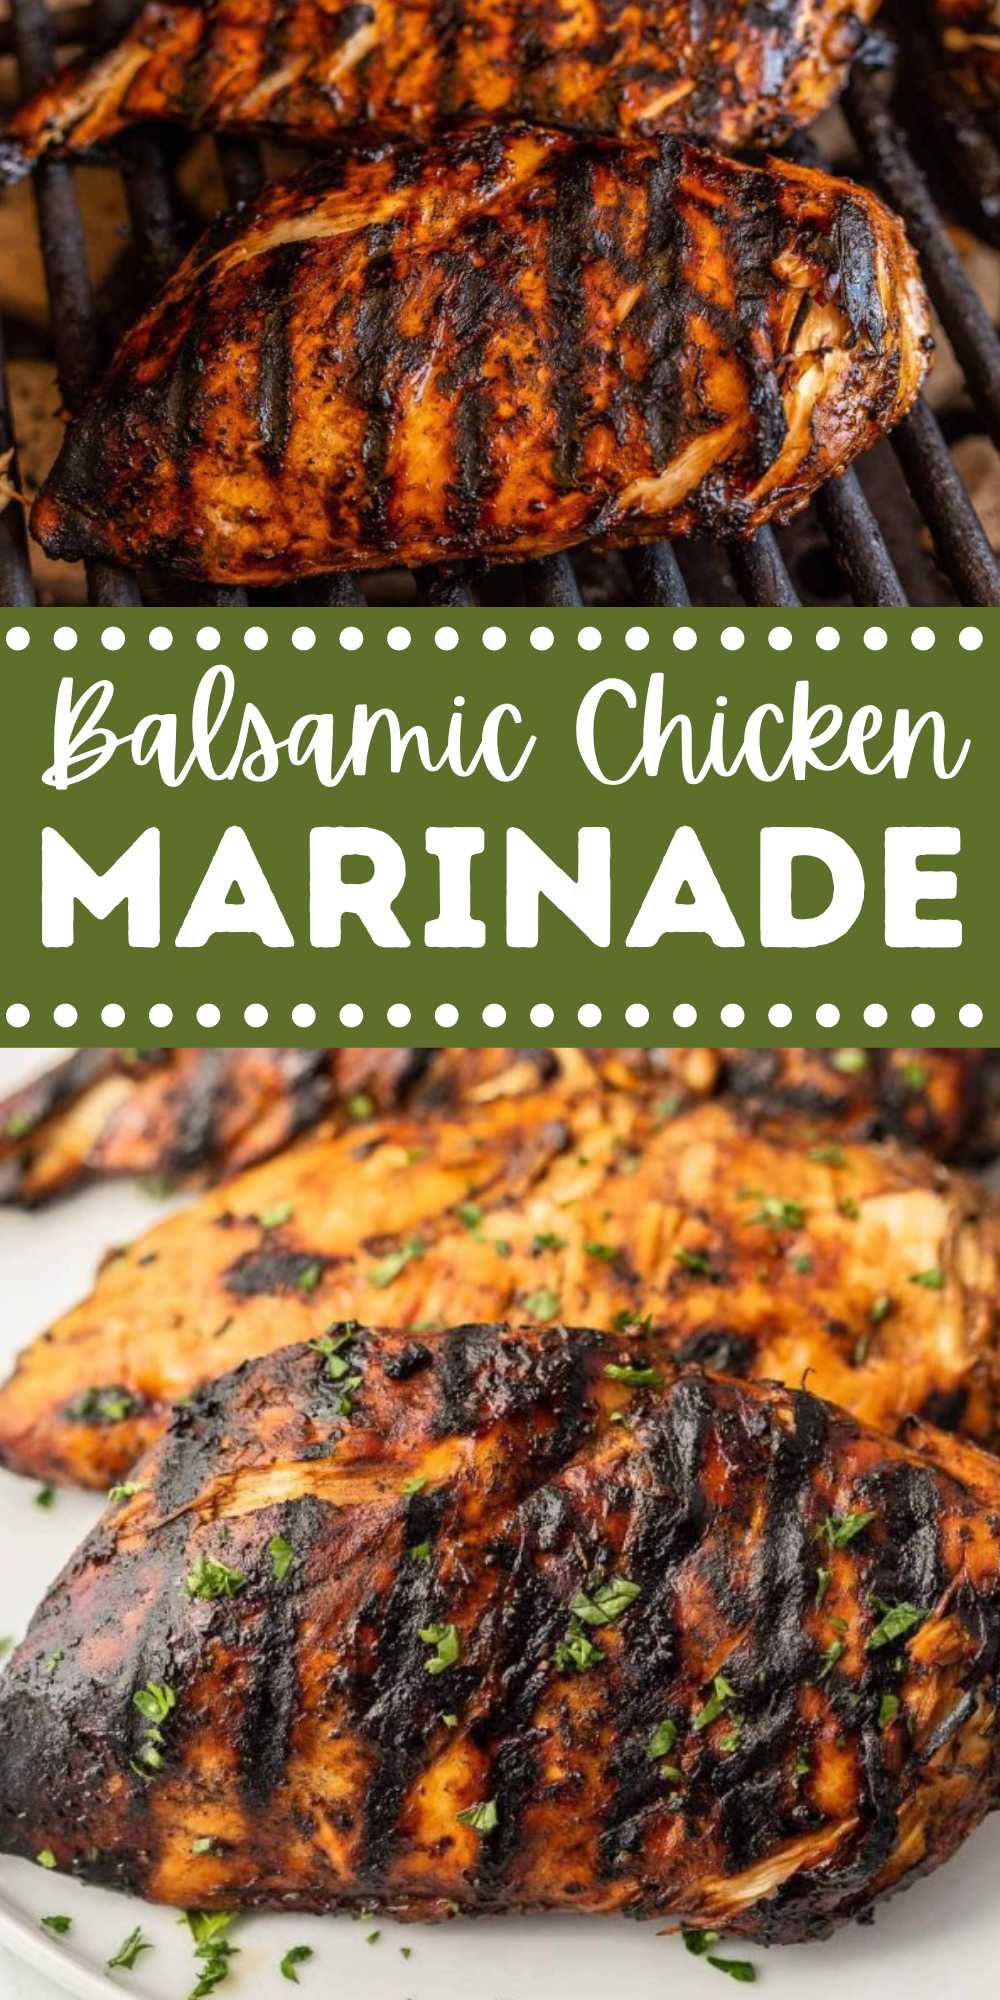 This Balsamic Chicken Marinade is a game changer for your chicken. It is loaded with flavor and made with simple ingredients. Serve this grill chicken with your favorite side dishes or slice and serve on your favorite salads or pasta. #eatingonadime #balsamicchickenmarinade #balsamicmarinade